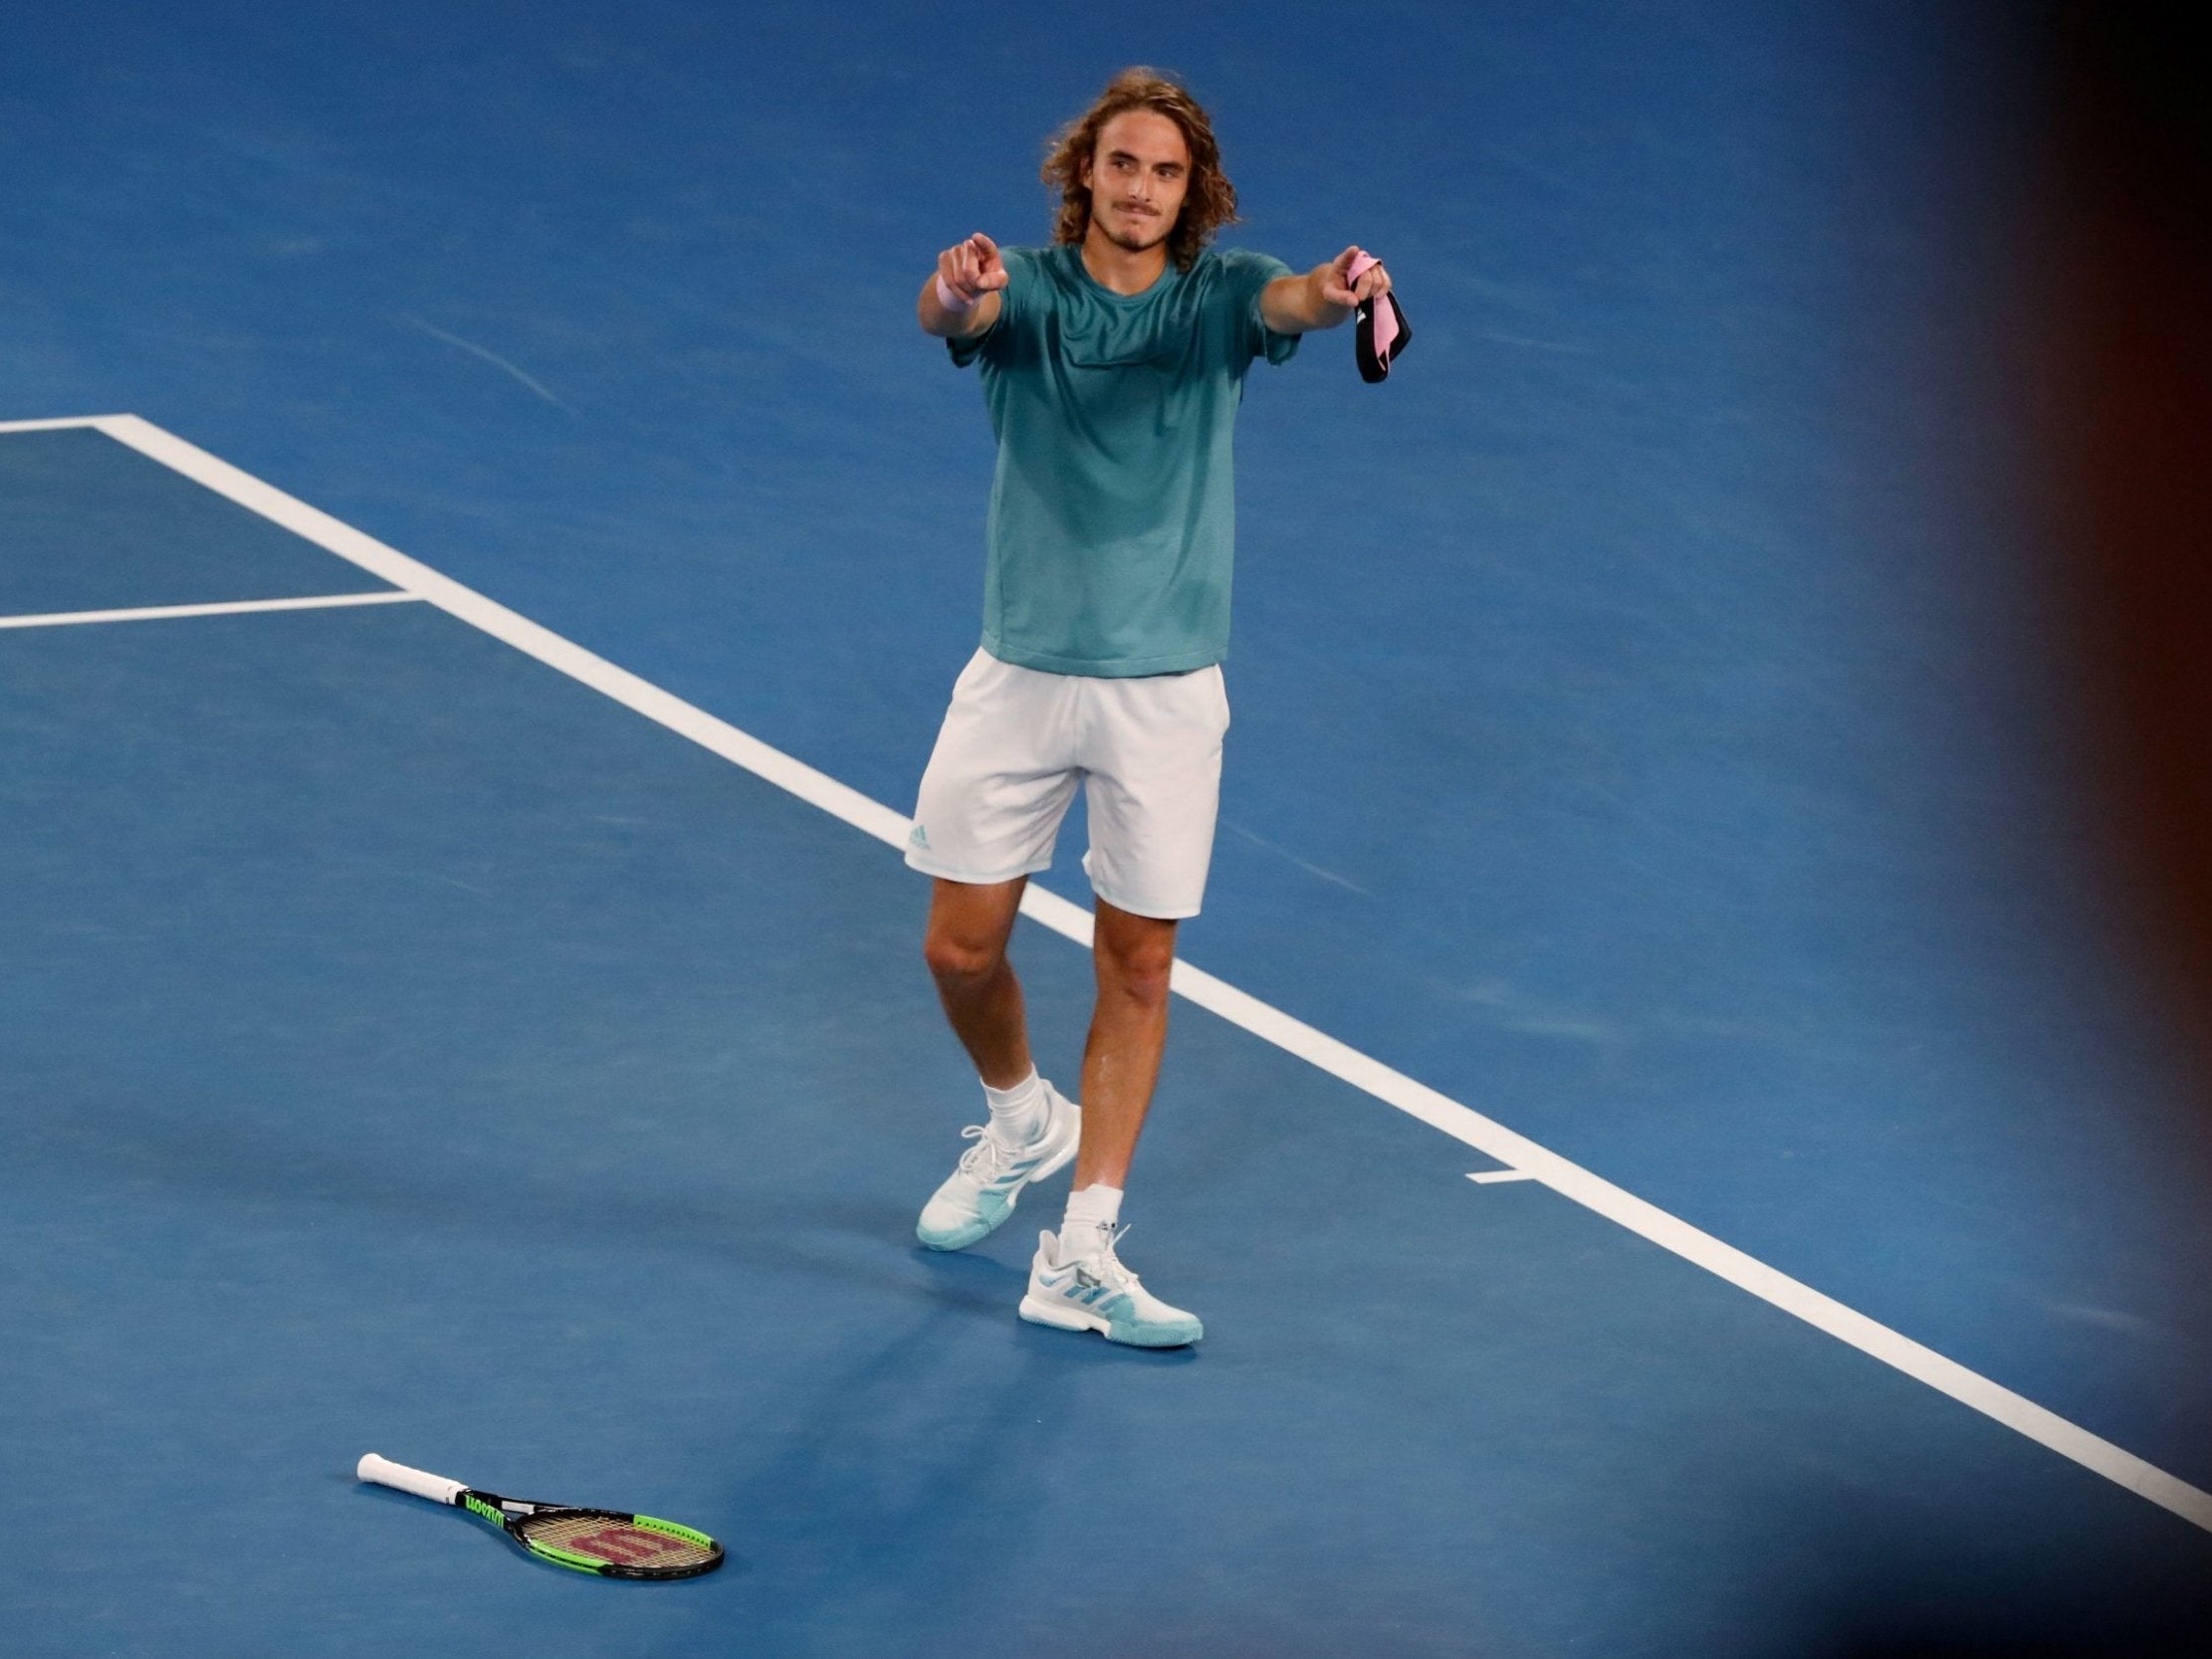 Tsitsipas could scarcely believe his achievement